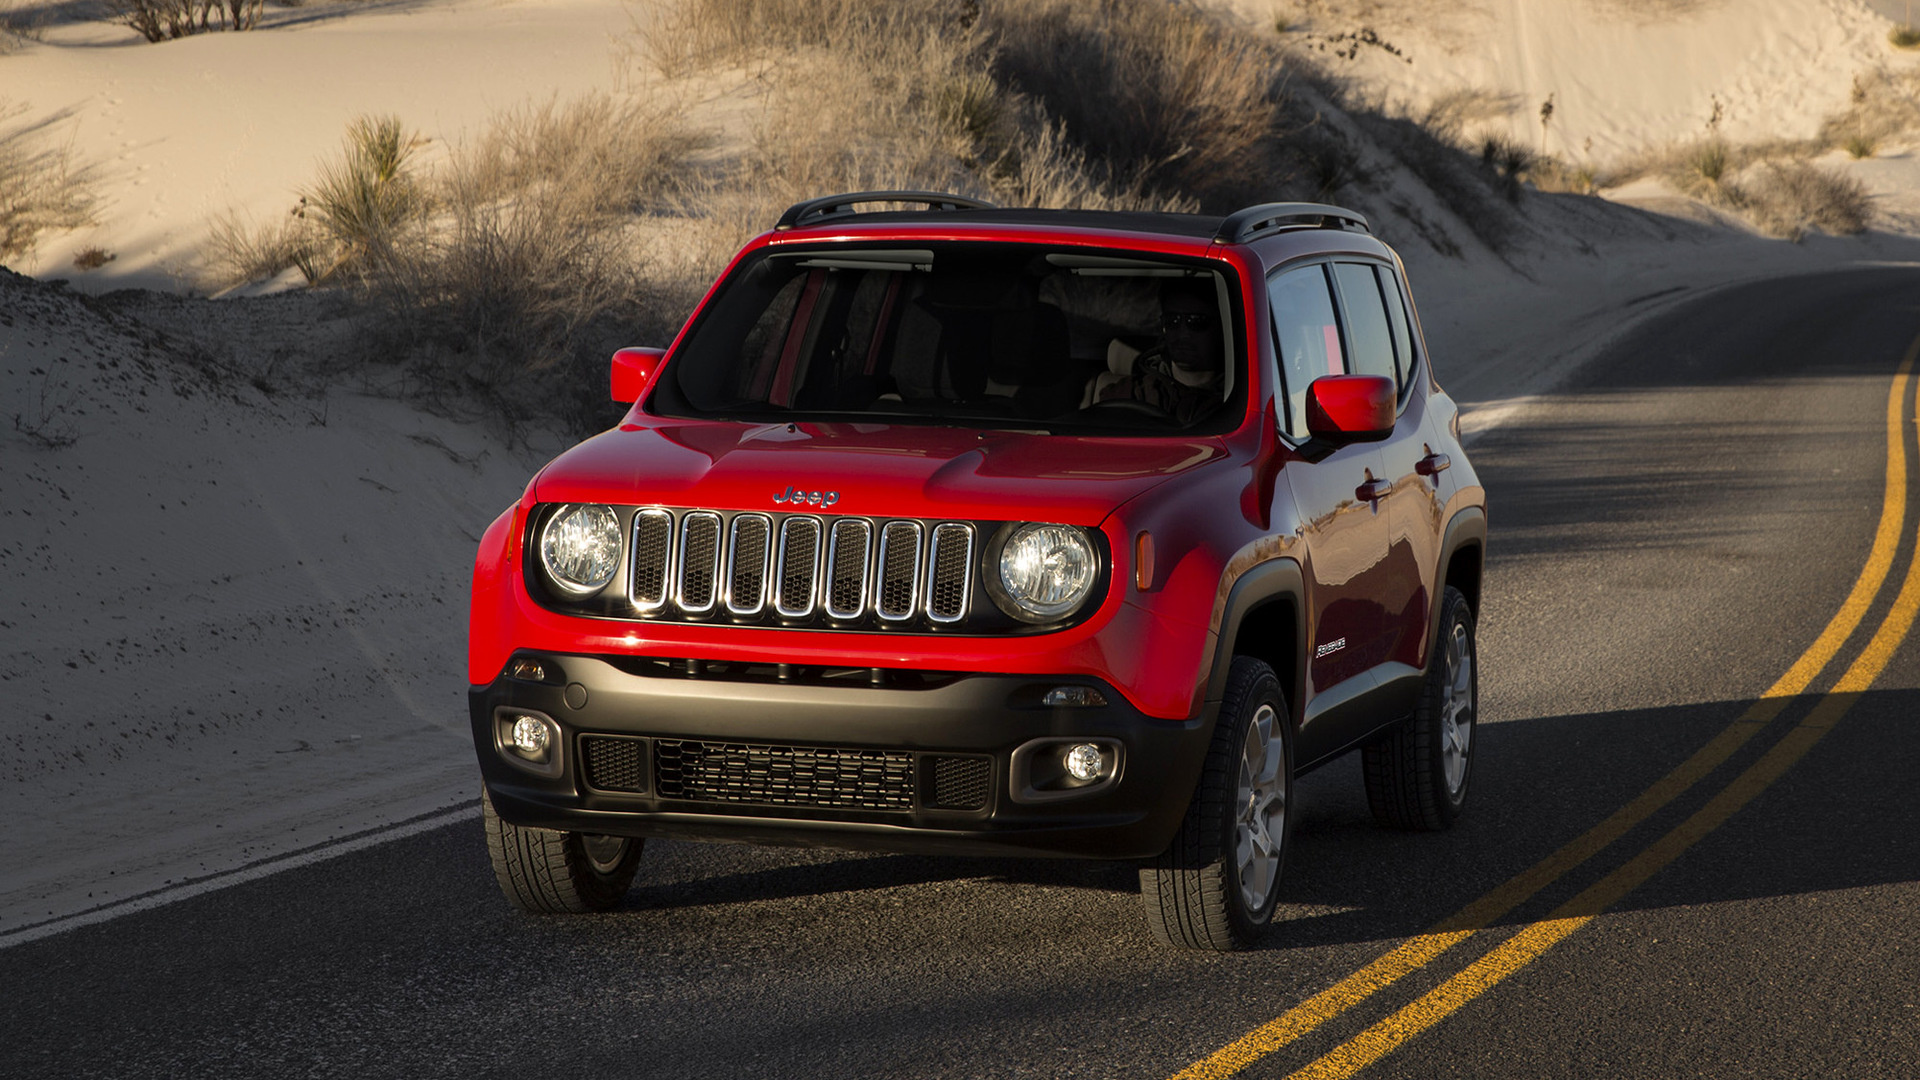 Jeep Renegade, Auto industry, Latitude model, High-definition images, 1920x1080 Full HD Desktop